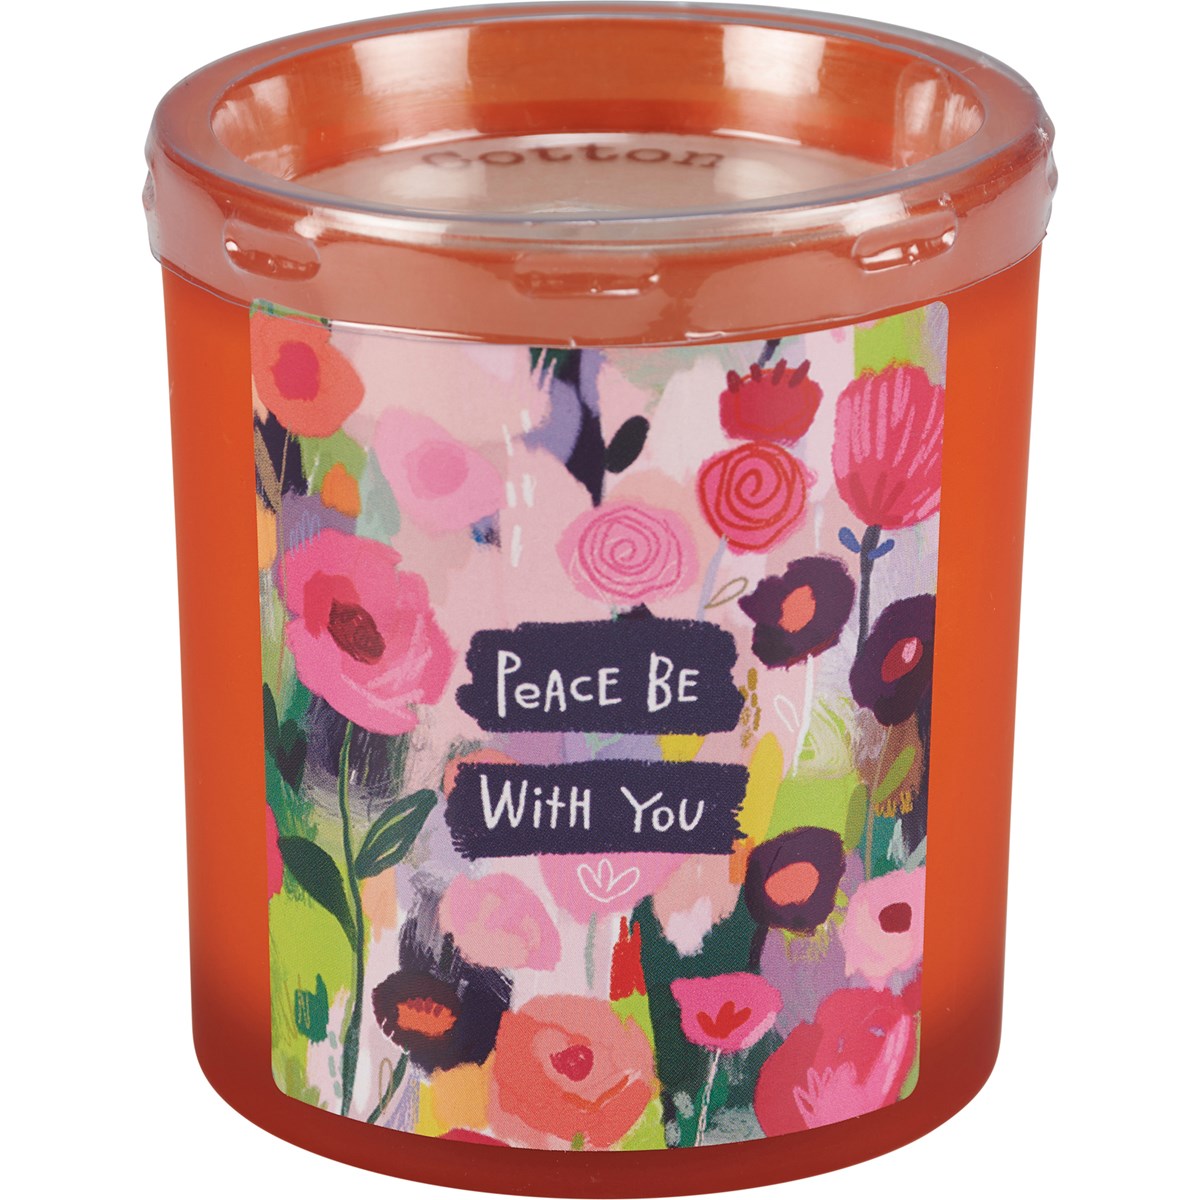 Peace Be With You Jar Candle - Soy Wax, Glass, Cotton